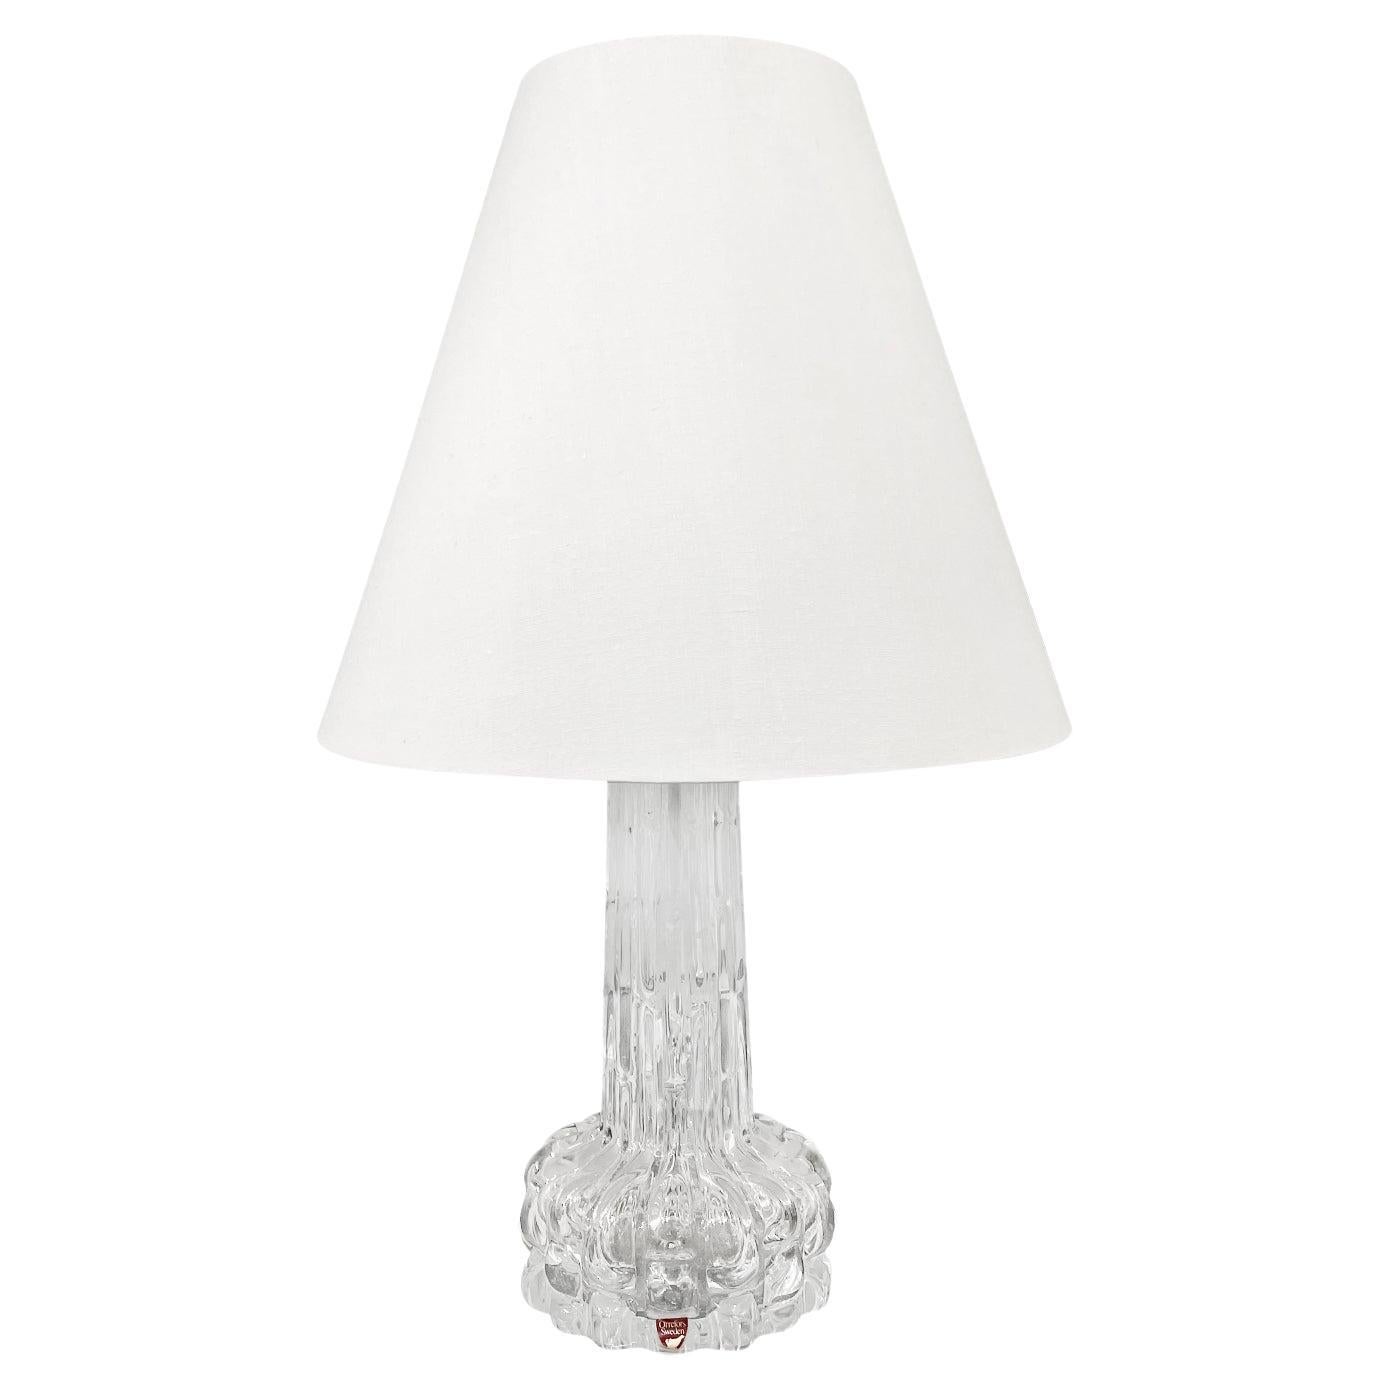 20th Century, Swedish, Orrefors Table Lamp, Scandinavian Light by Carl Fagerlund